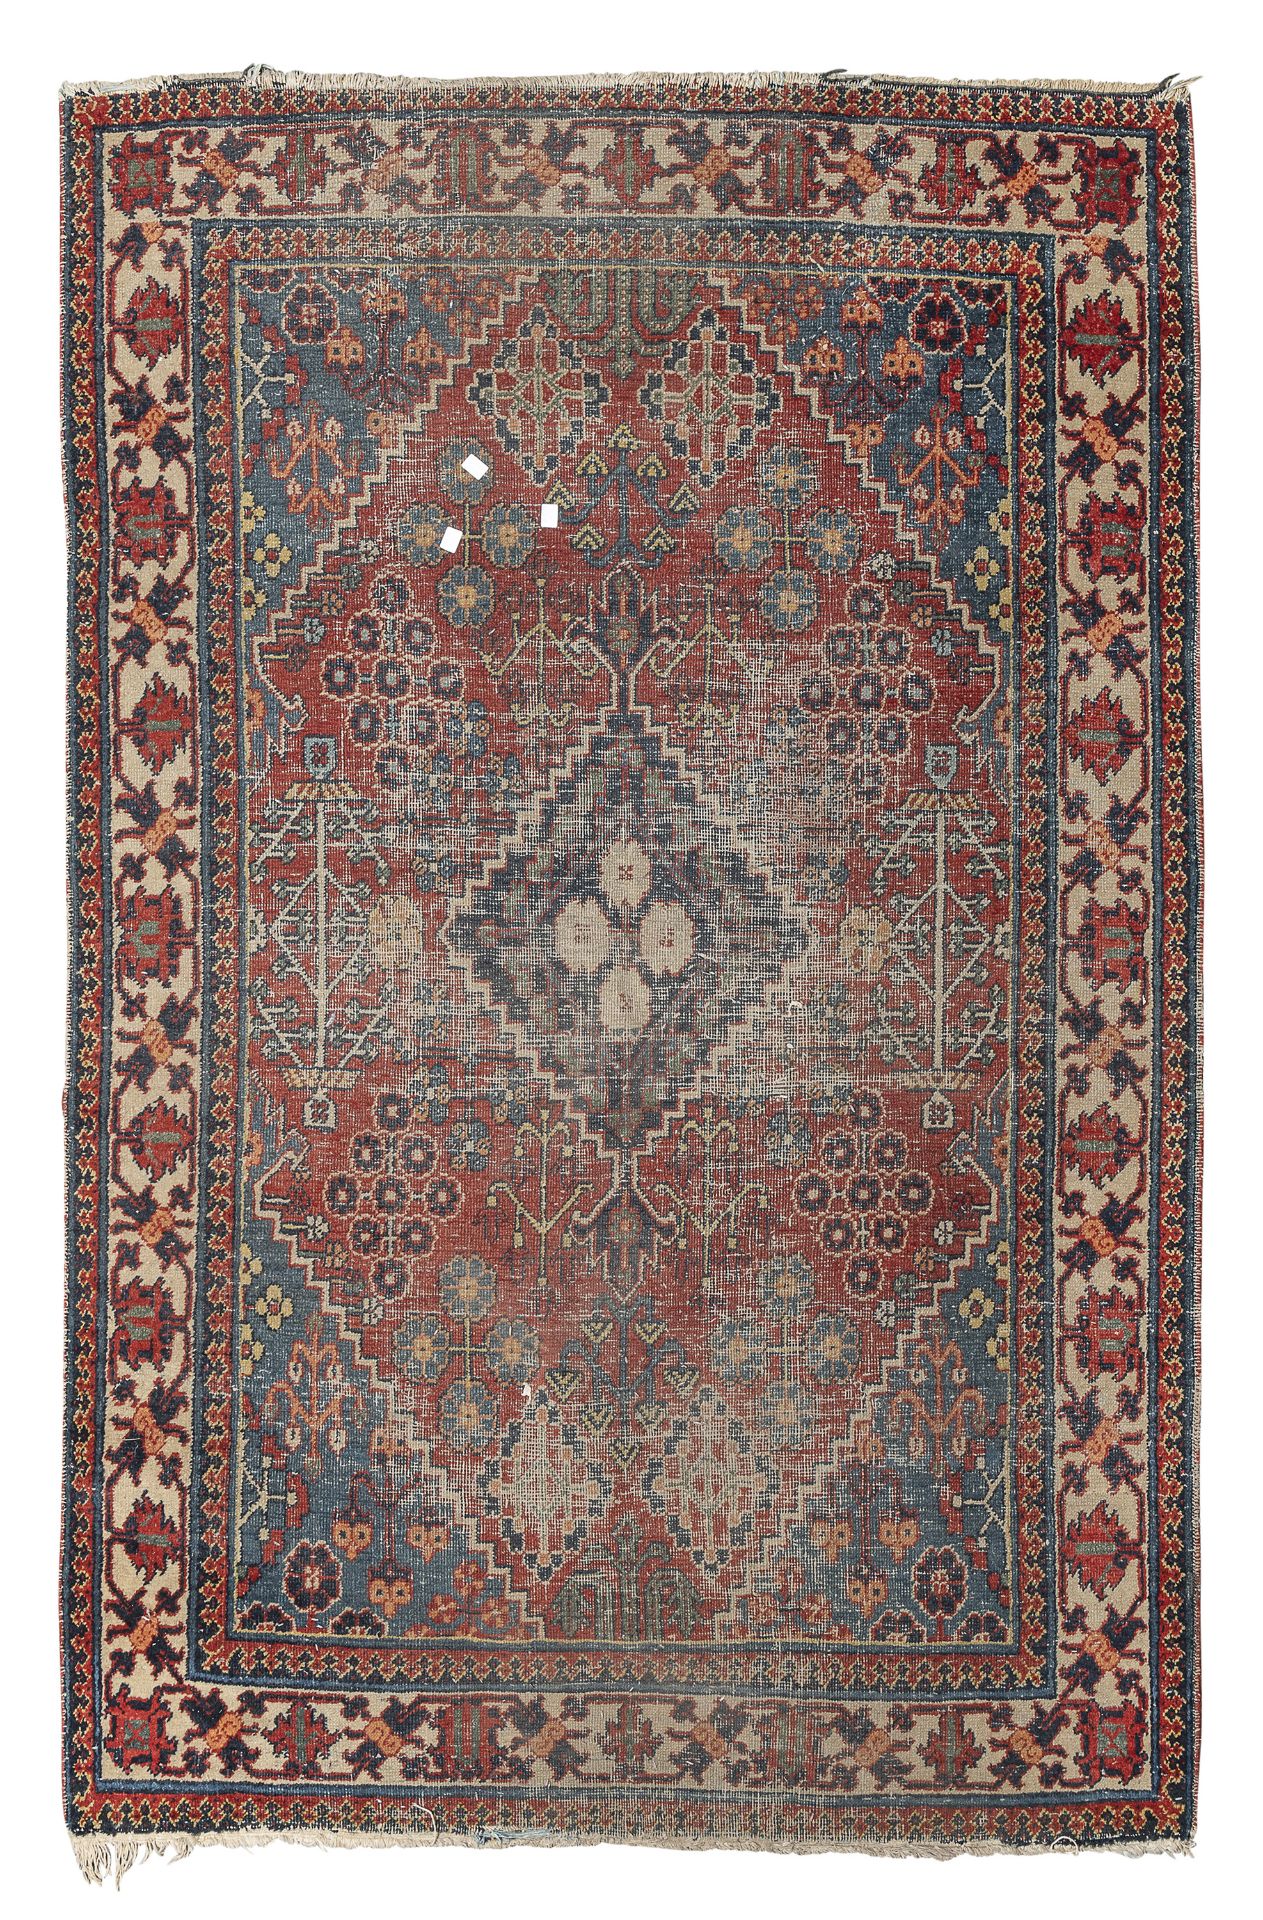 REMAINS OF FERAGHAN CARPET EARLY 20TH CENTURY